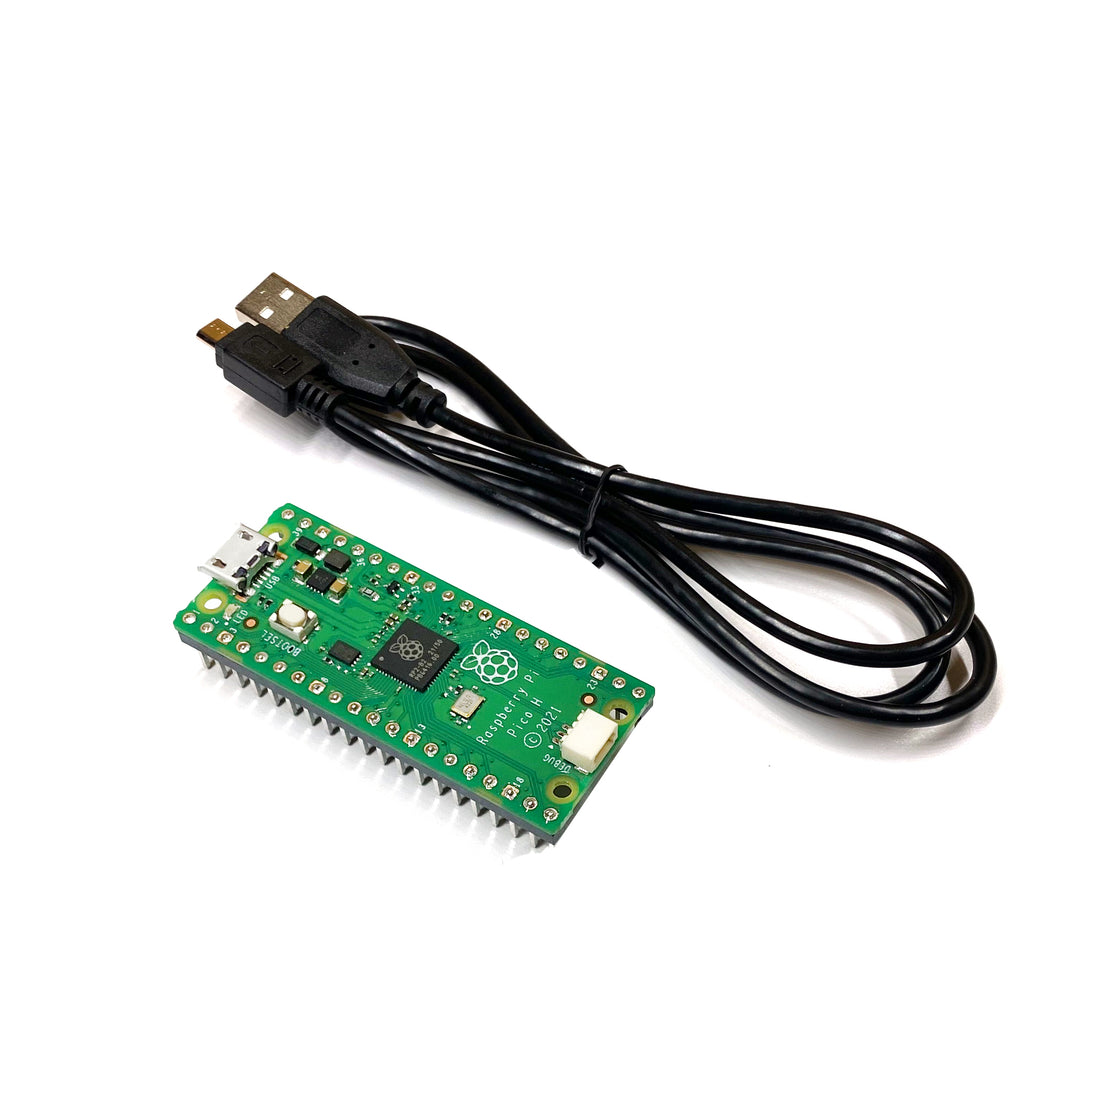 PepperTech Digital Raspberry Pi Pico-H (Pre-soldered Headers) Kit with Micro-USB to USB Cable